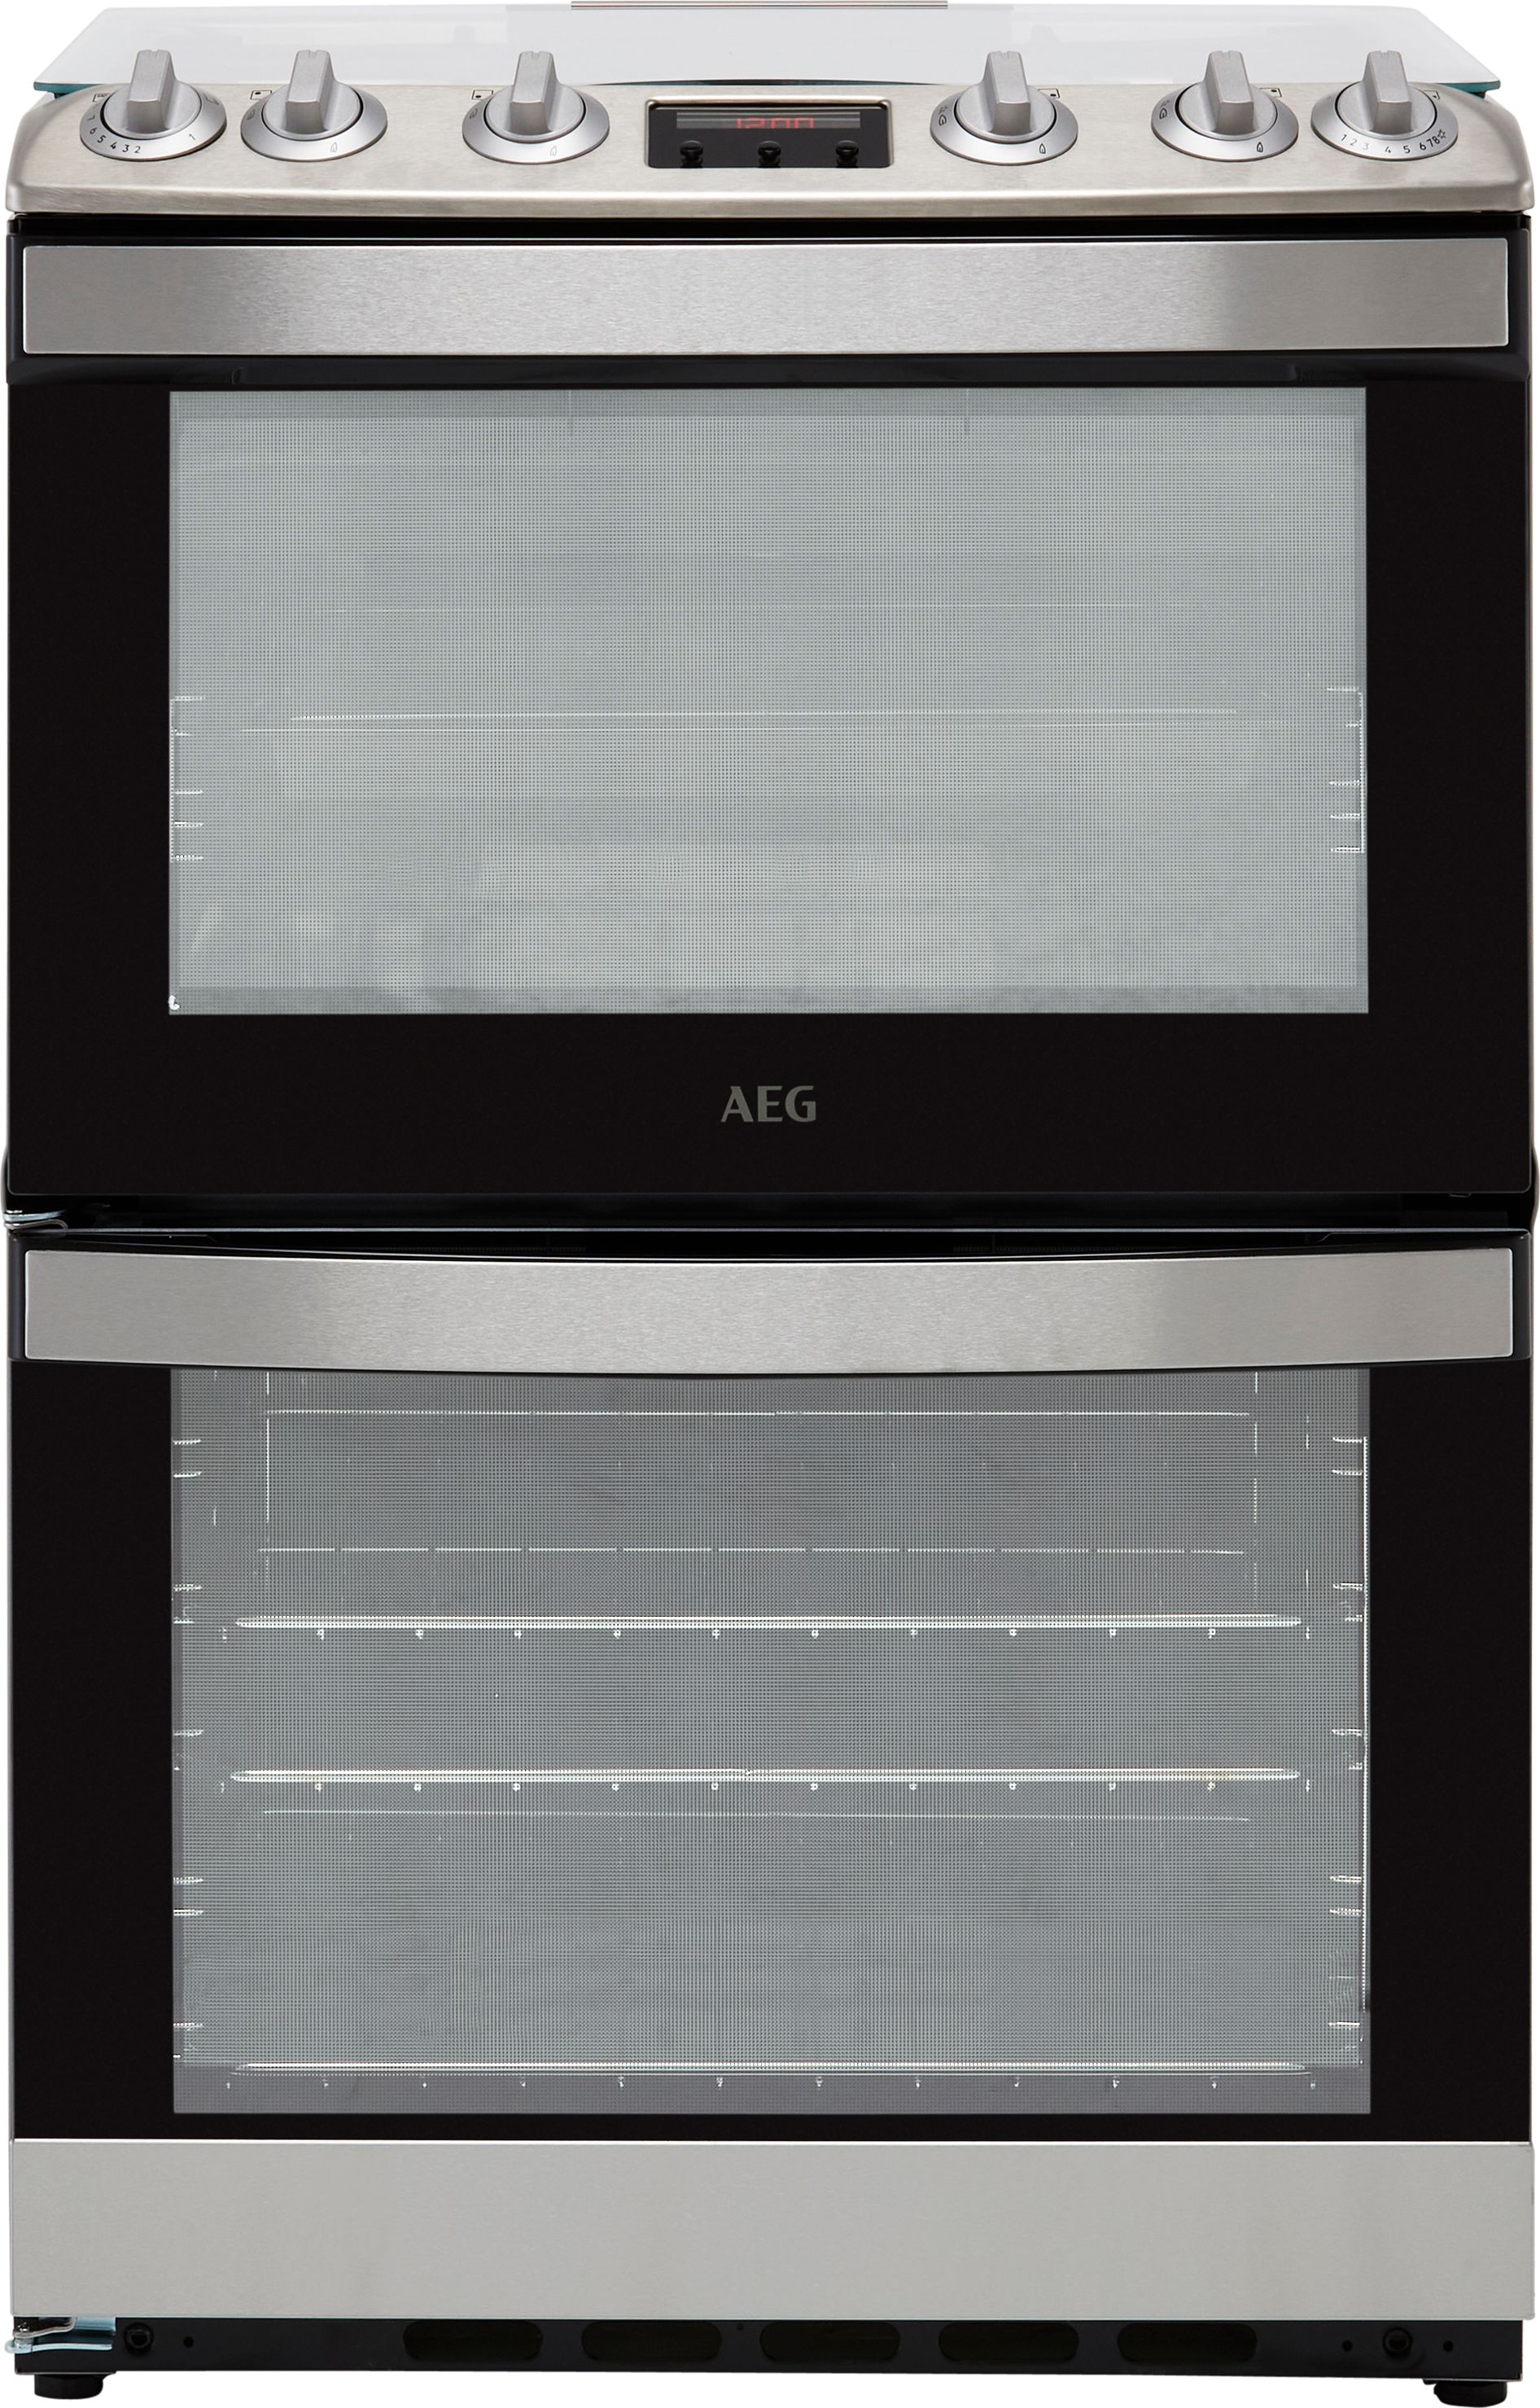 AEG CGB6130ACM 60cm Freestanding Gas Cooker with Variable Electric Grill - Stainless Steel - A/A Rated, Stainless Steel